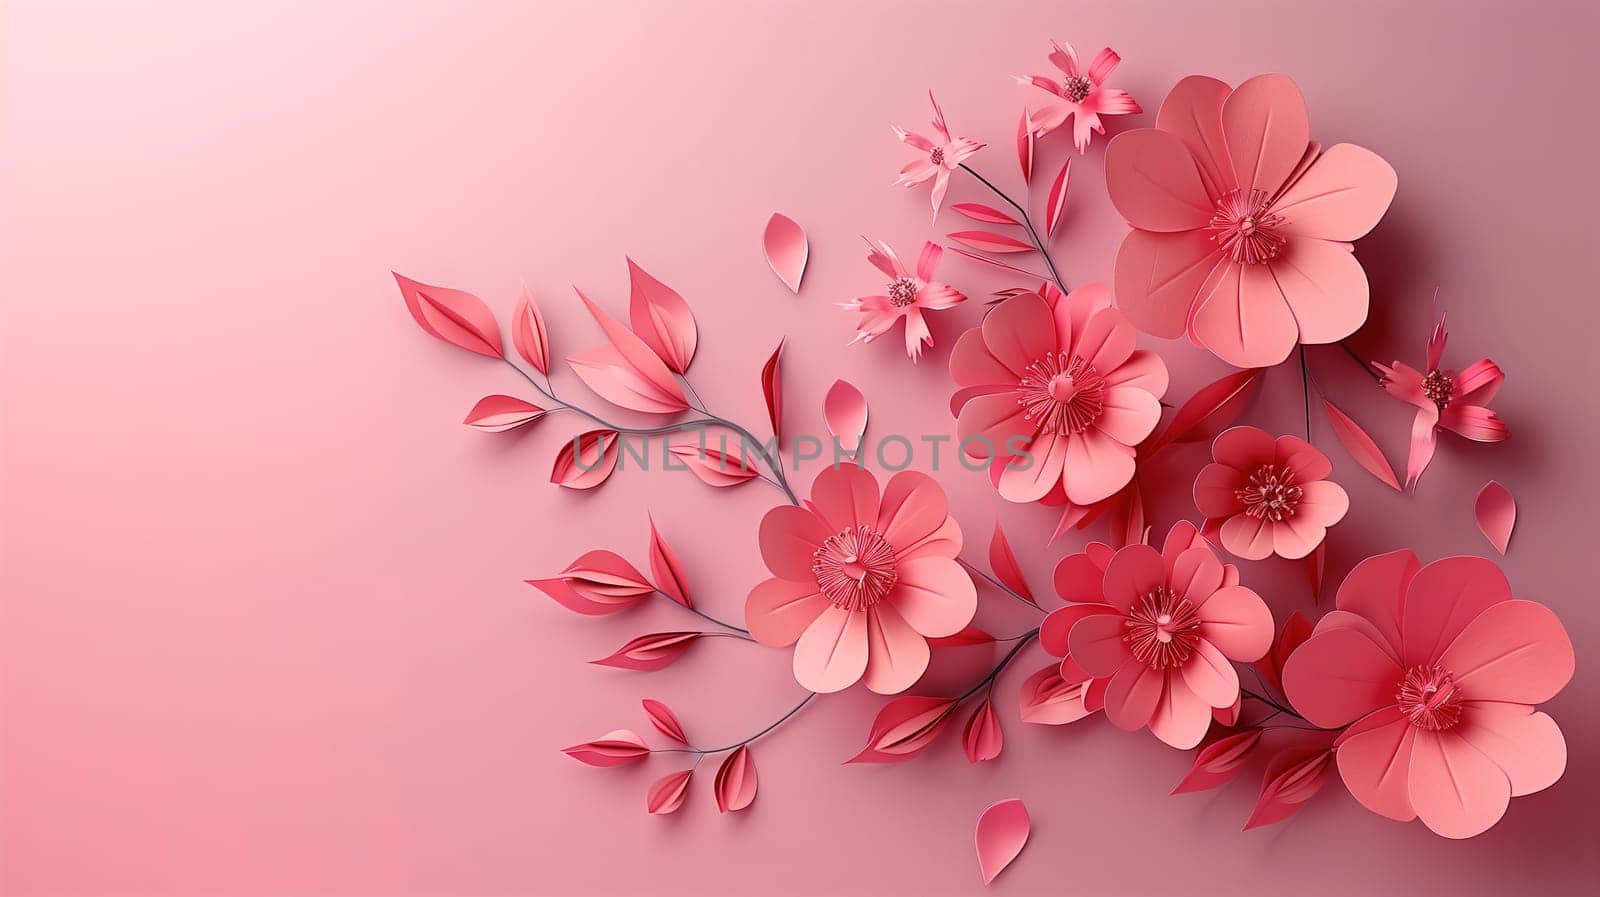 A collection of paper flowers in various shades of pink spread out on a pale pink background. The flowers are intricately crafted and arranged to create a visually appealing composition.